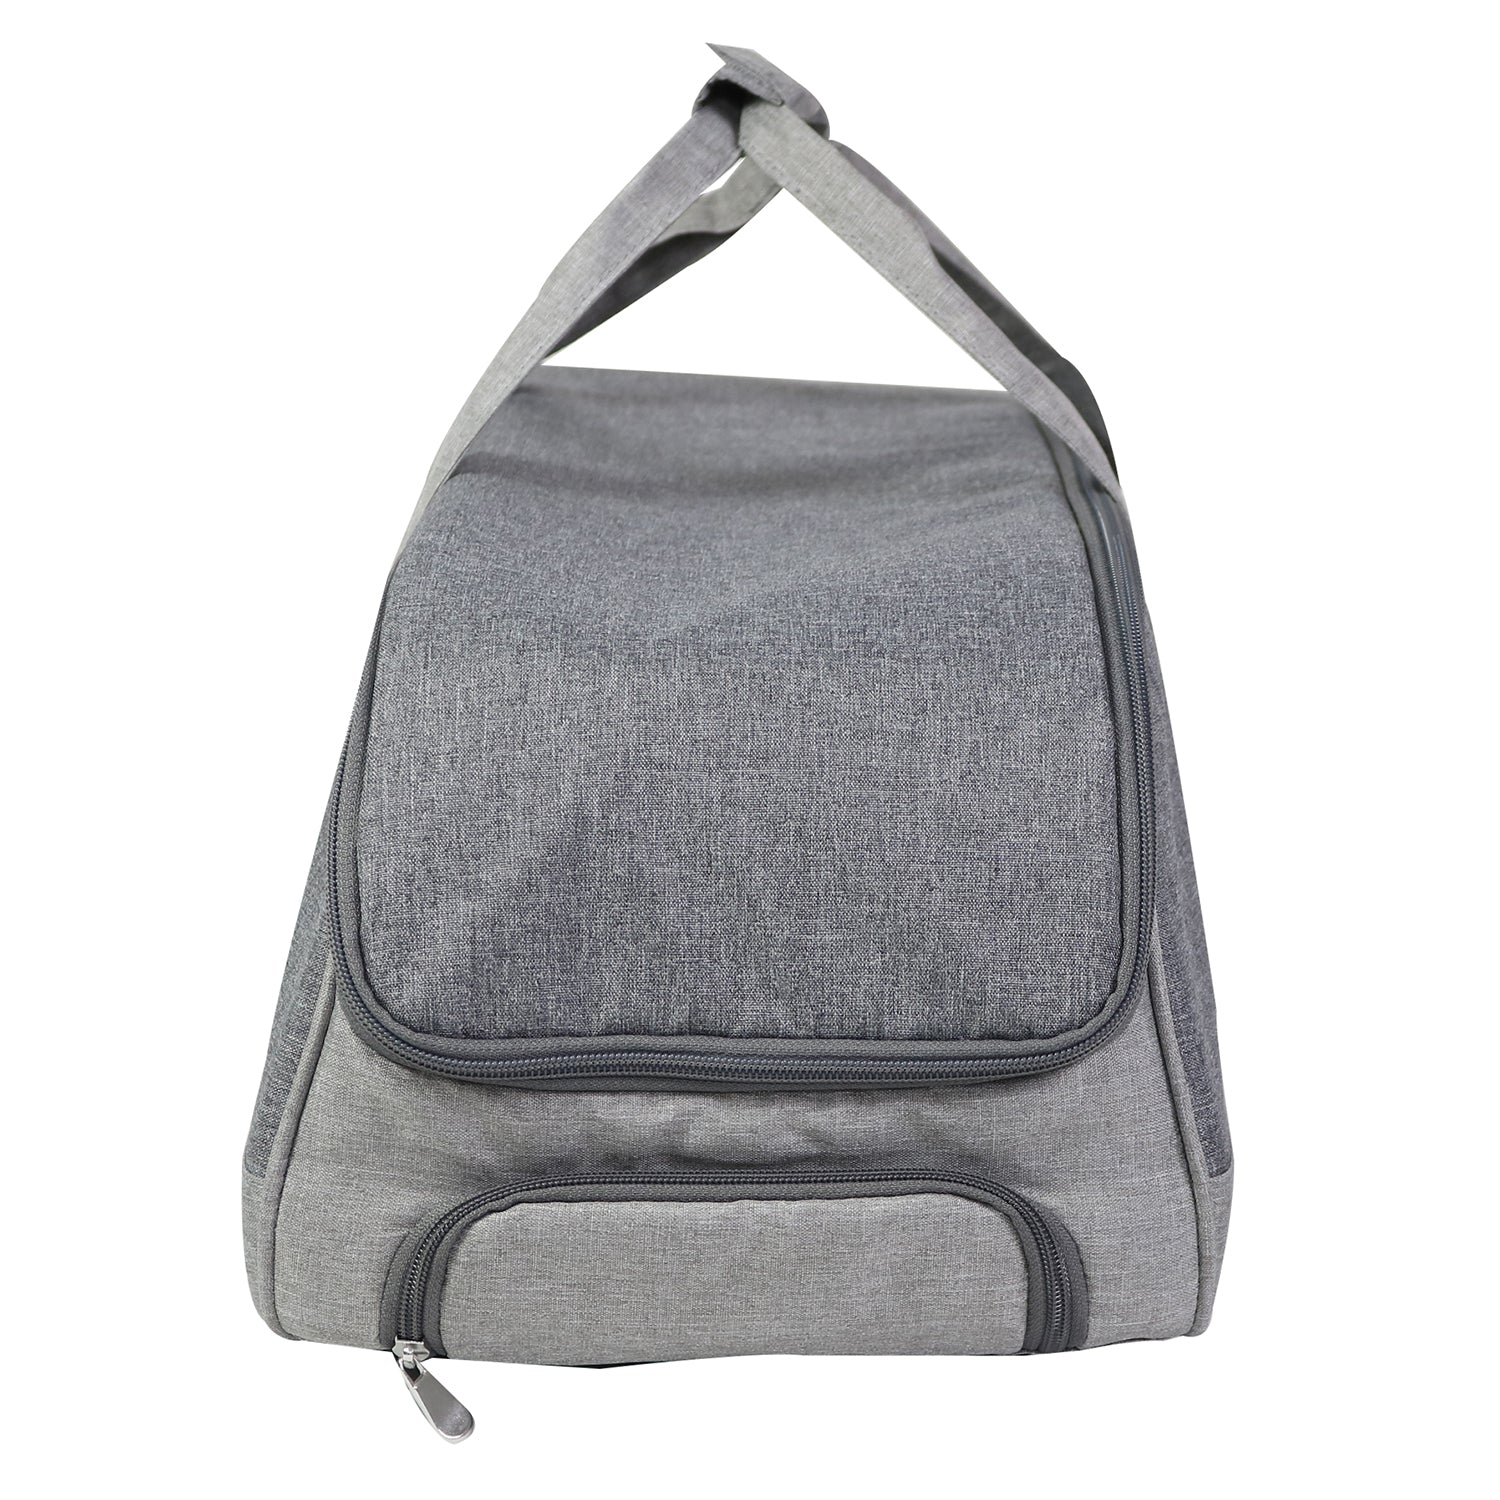 Rolling Craft Tote for Cricut, Brother, Silhouette Machines, Grey Heat -  Everything Mary